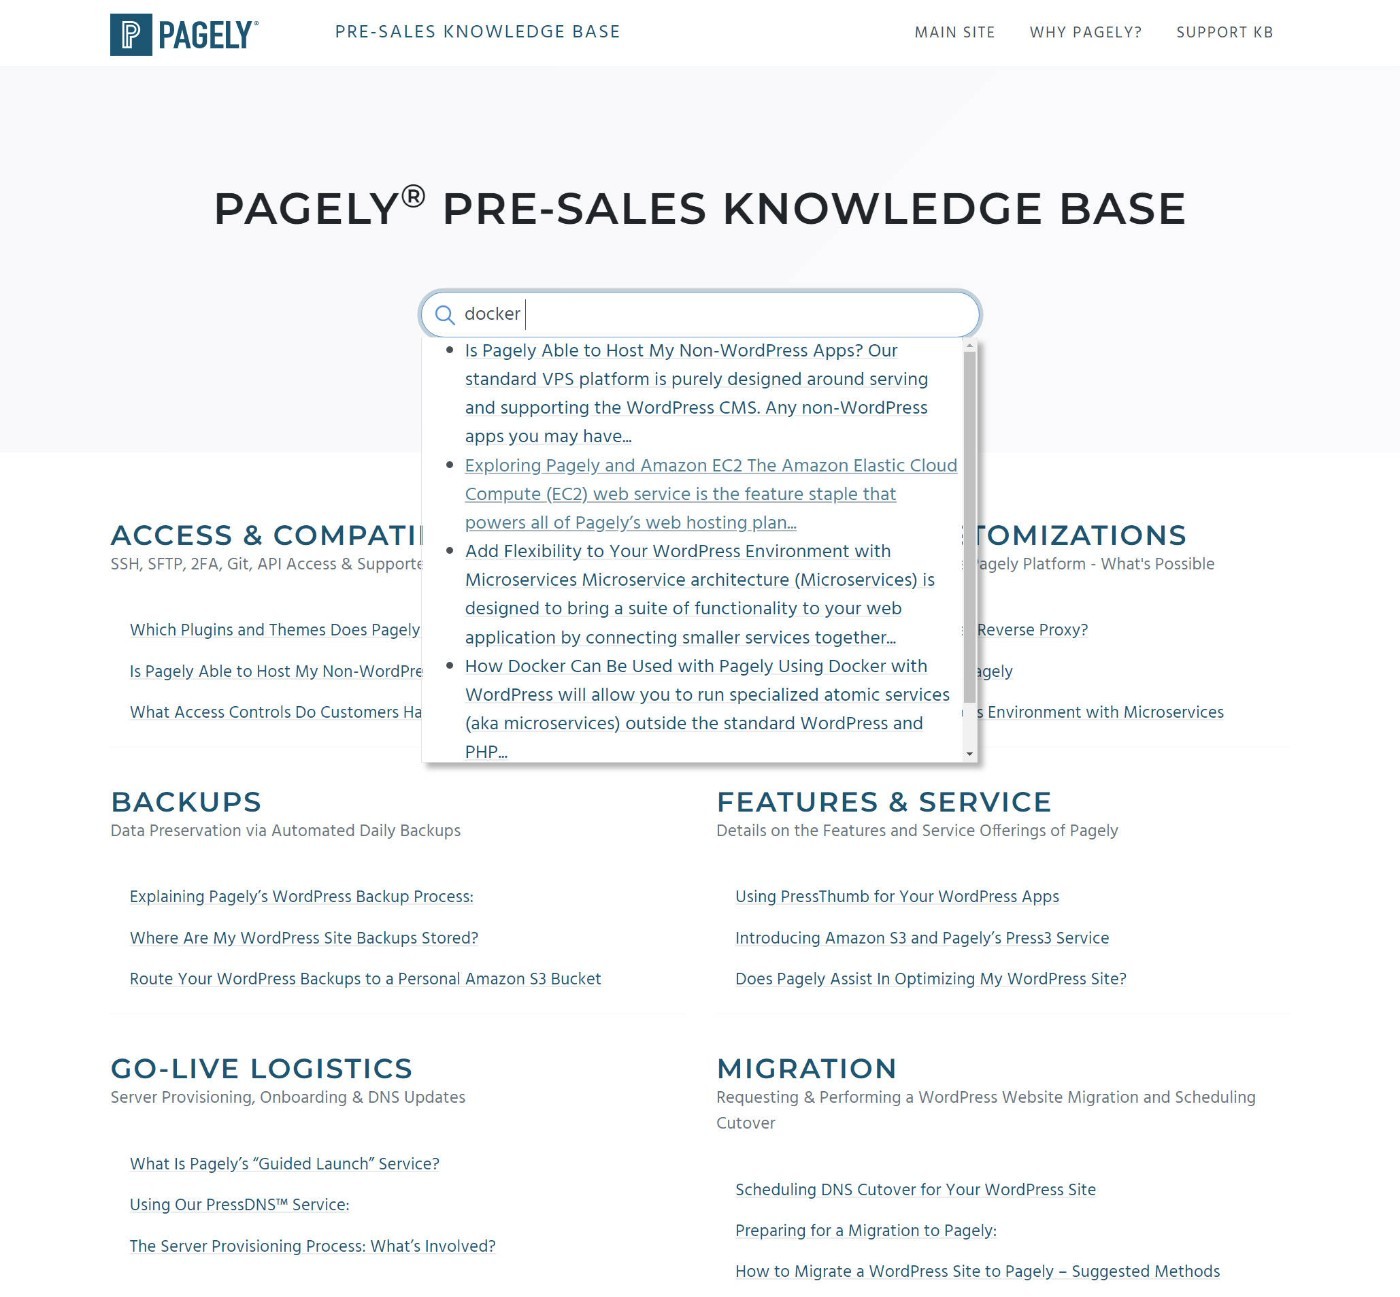 Pagely using Heroic Knowledge Base